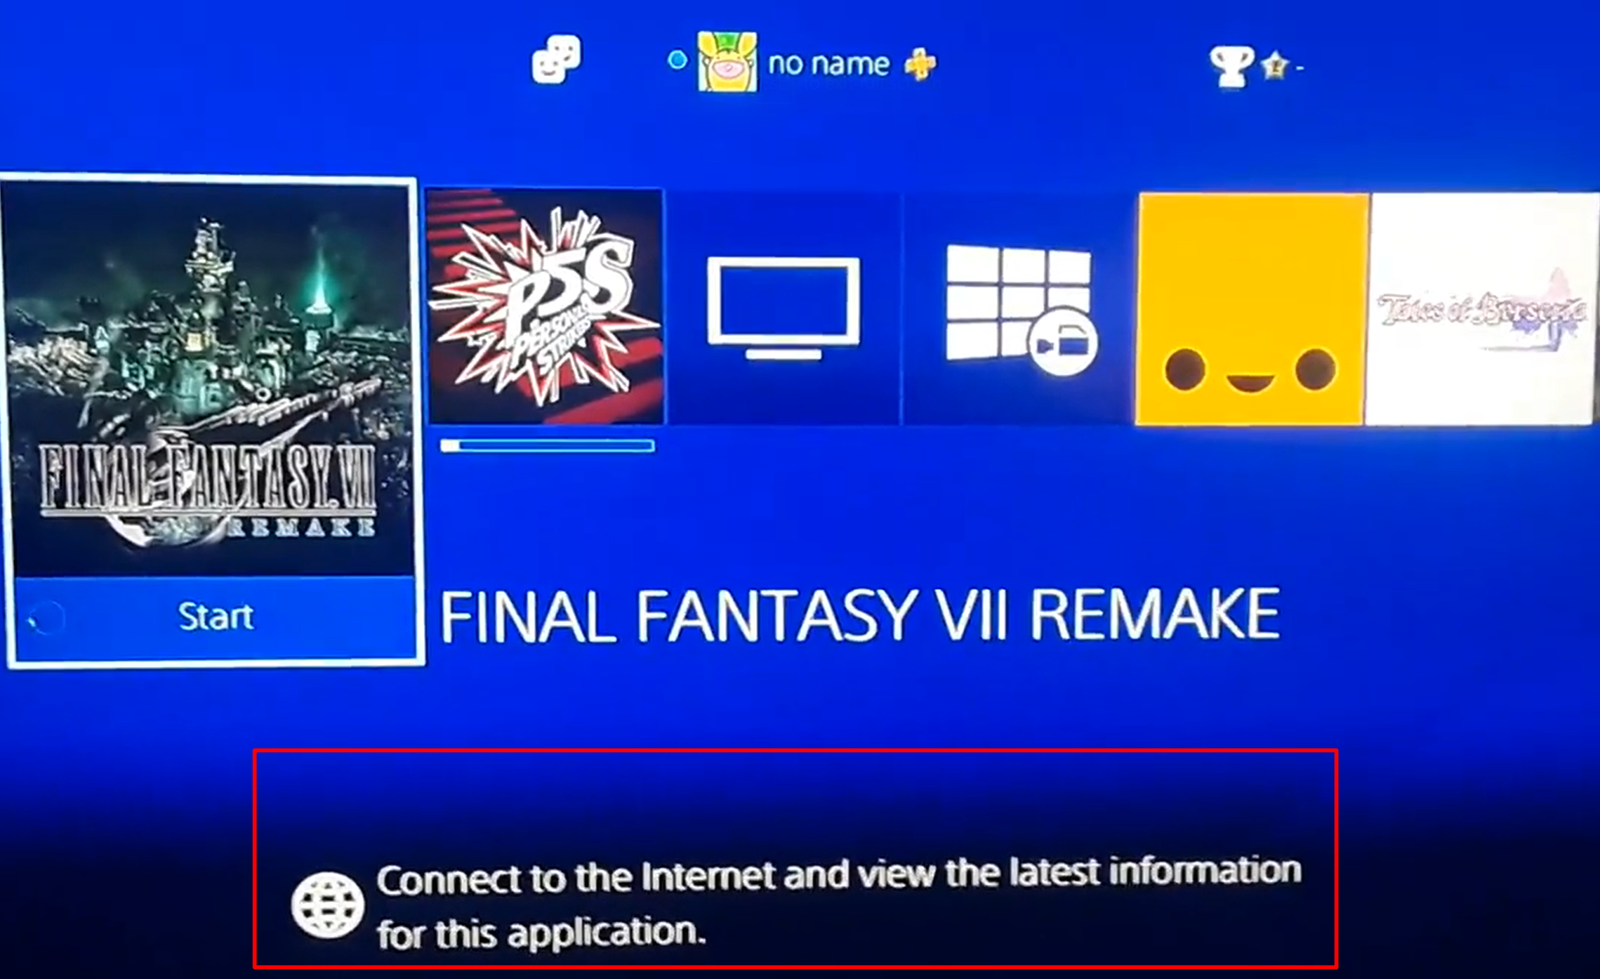 PS4 Keep Disconnecting From WiFi